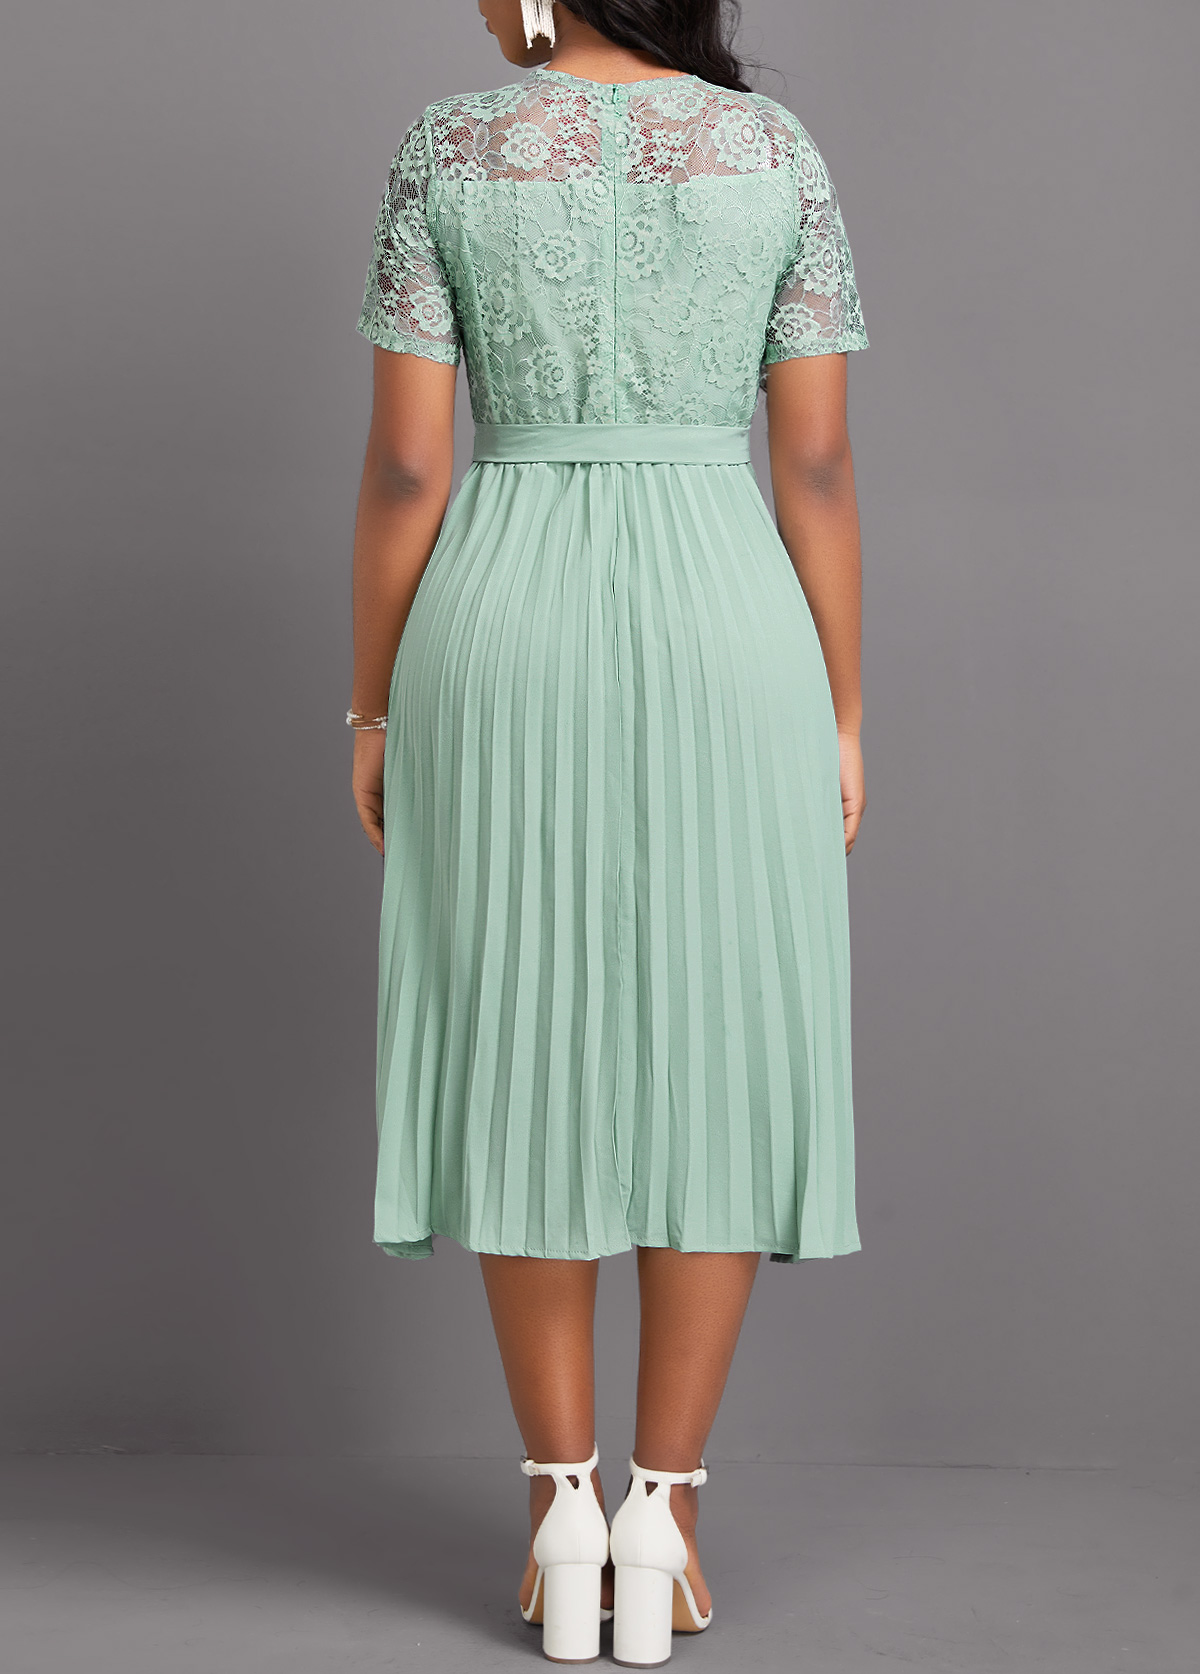 Lace Belted Light Green Short Sleeve Round Neck Dress